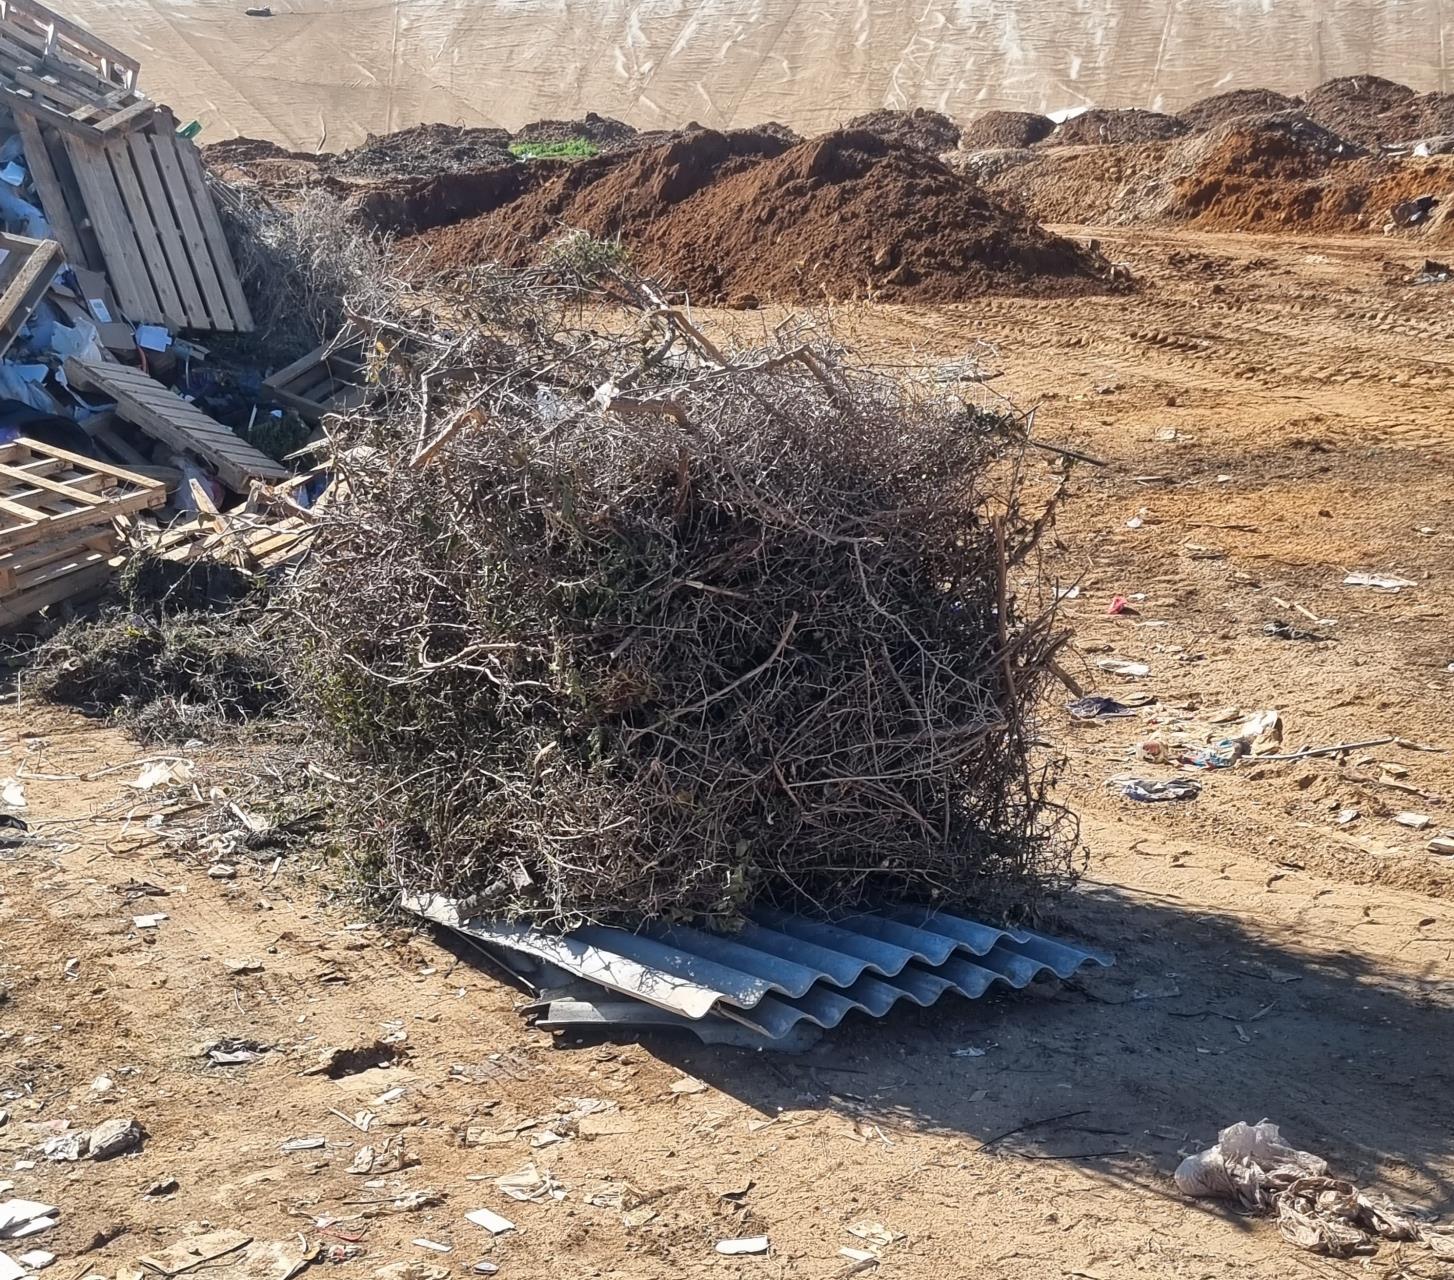 Fines issued for illegal asbestos dumping